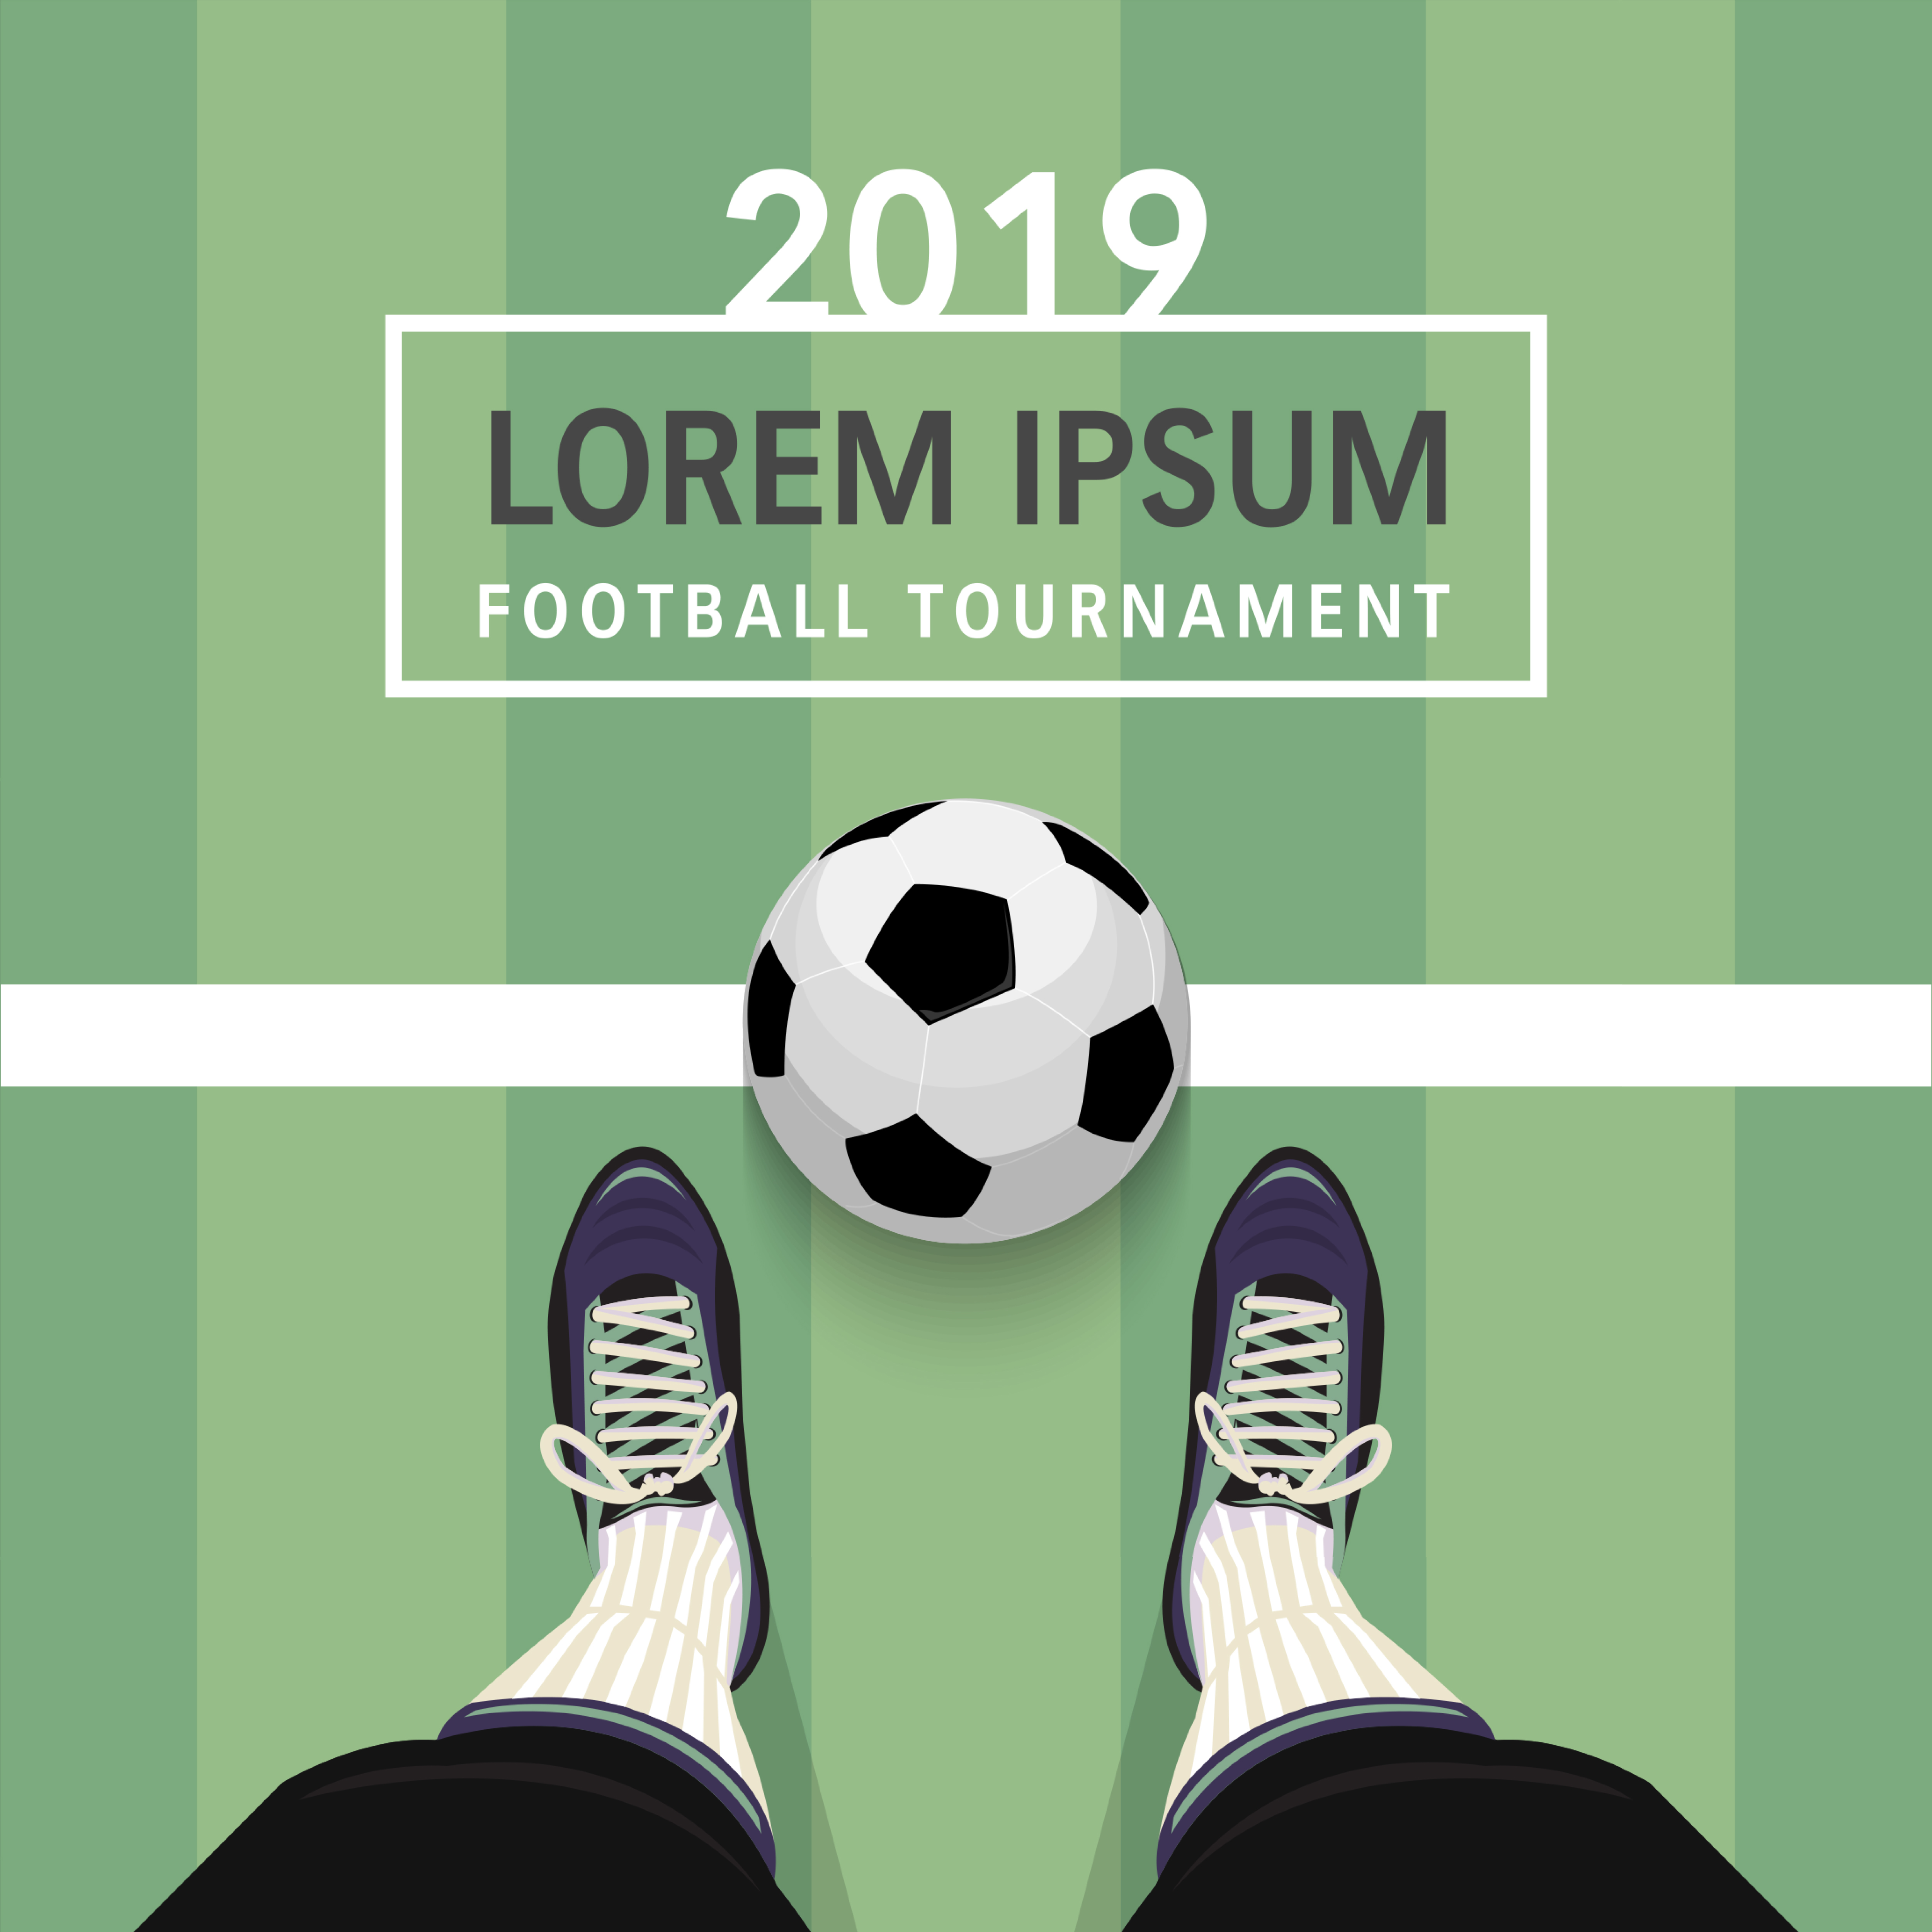 Ground clipart football scene. Tournament poster download free